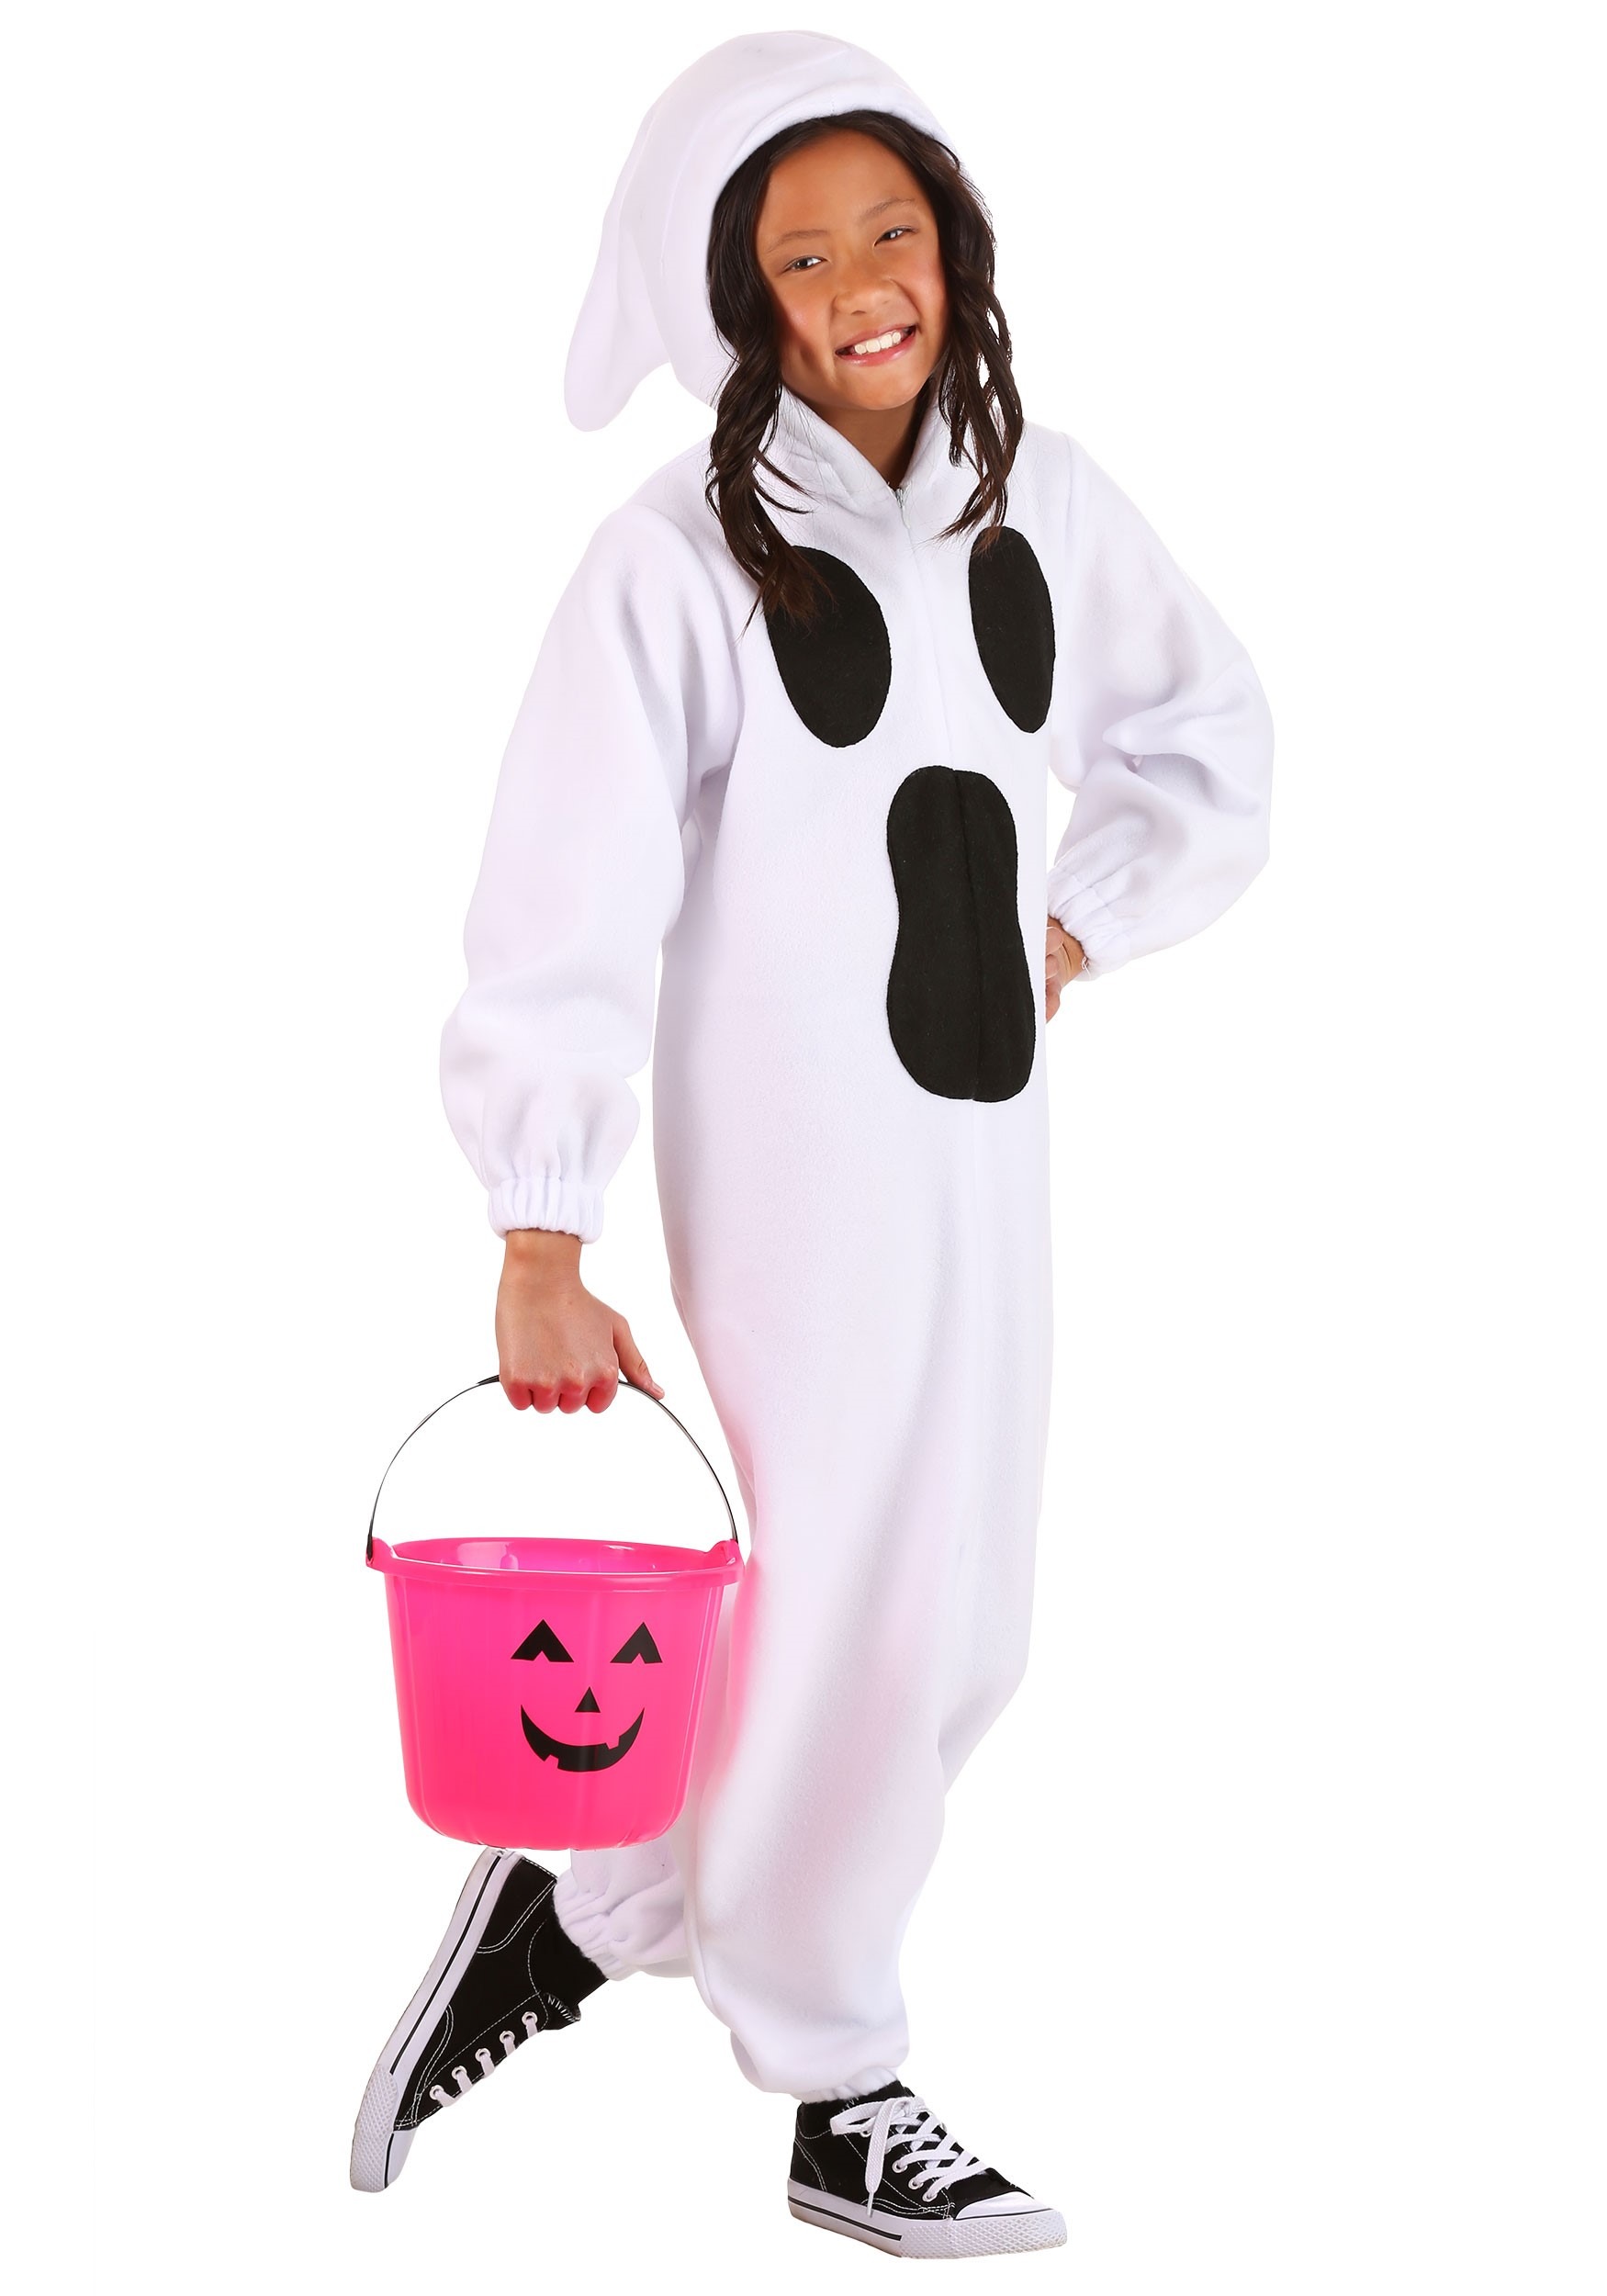 Photos - Fancy Dress GHOST FUN Costumes Ghastly  Child Costume Black/White FUN7158CH 